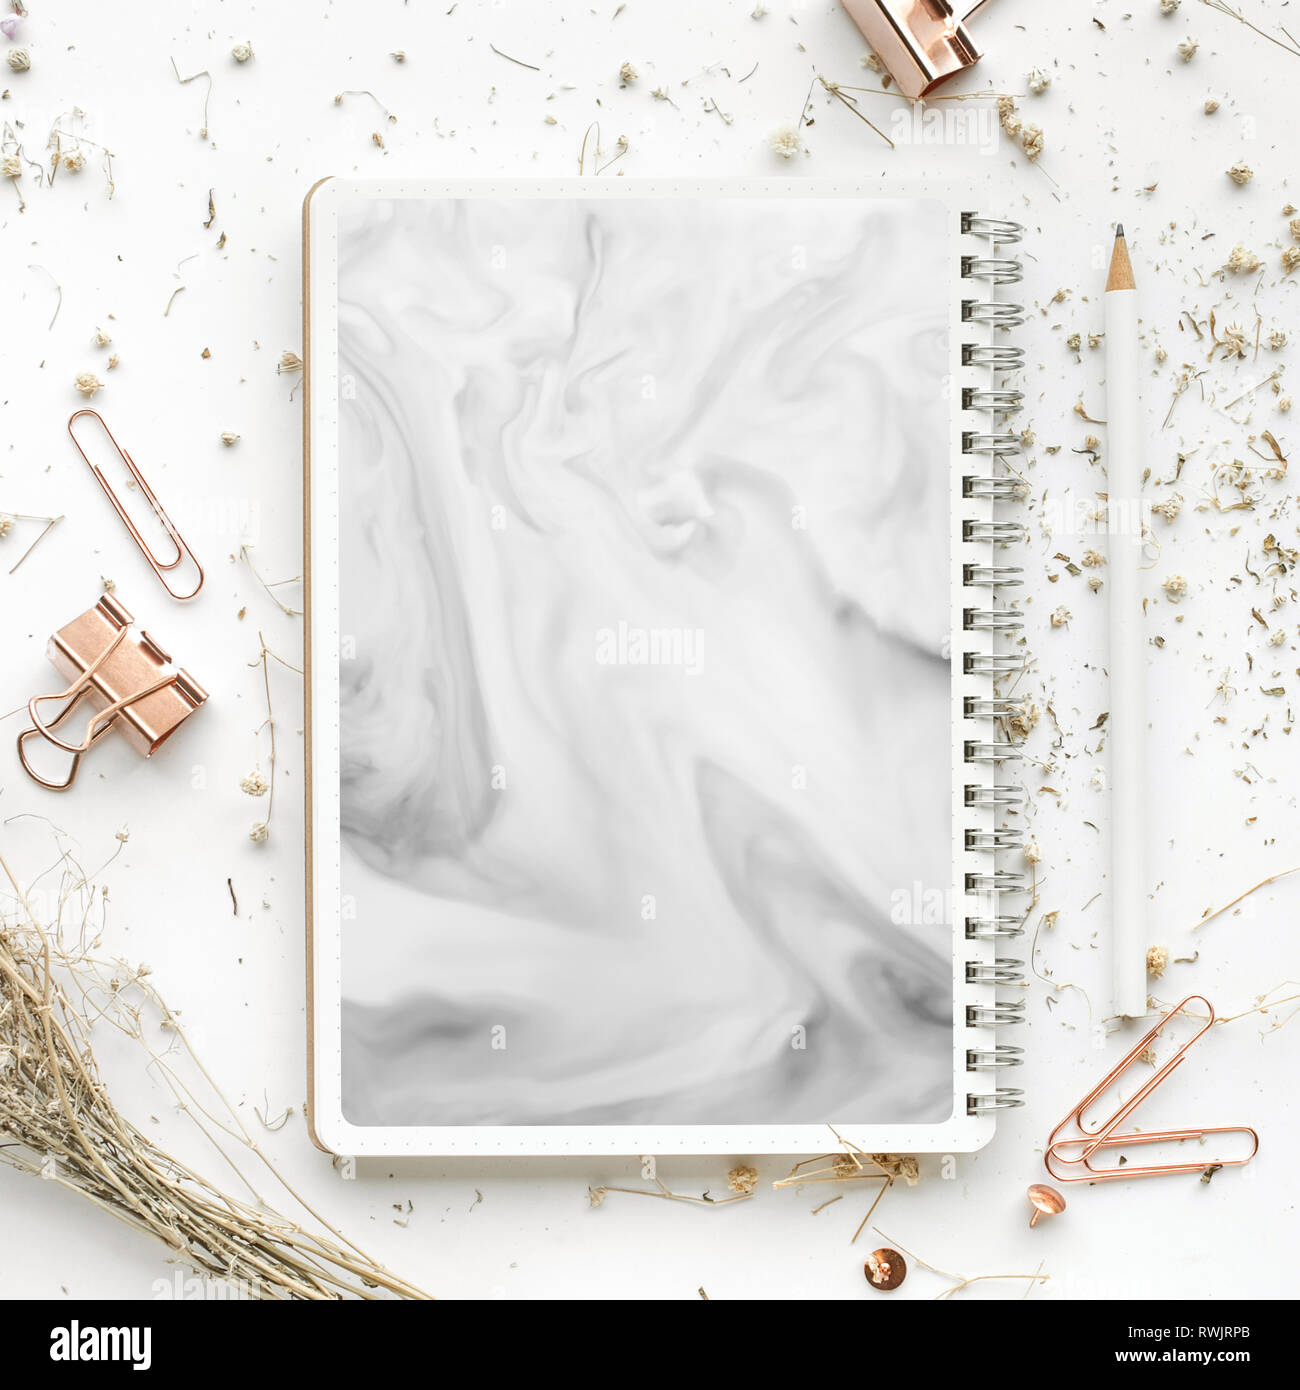 Top view of mock up accessories and dry flower on white desk table.flat lay design/copy space,elegant template Stock Photo